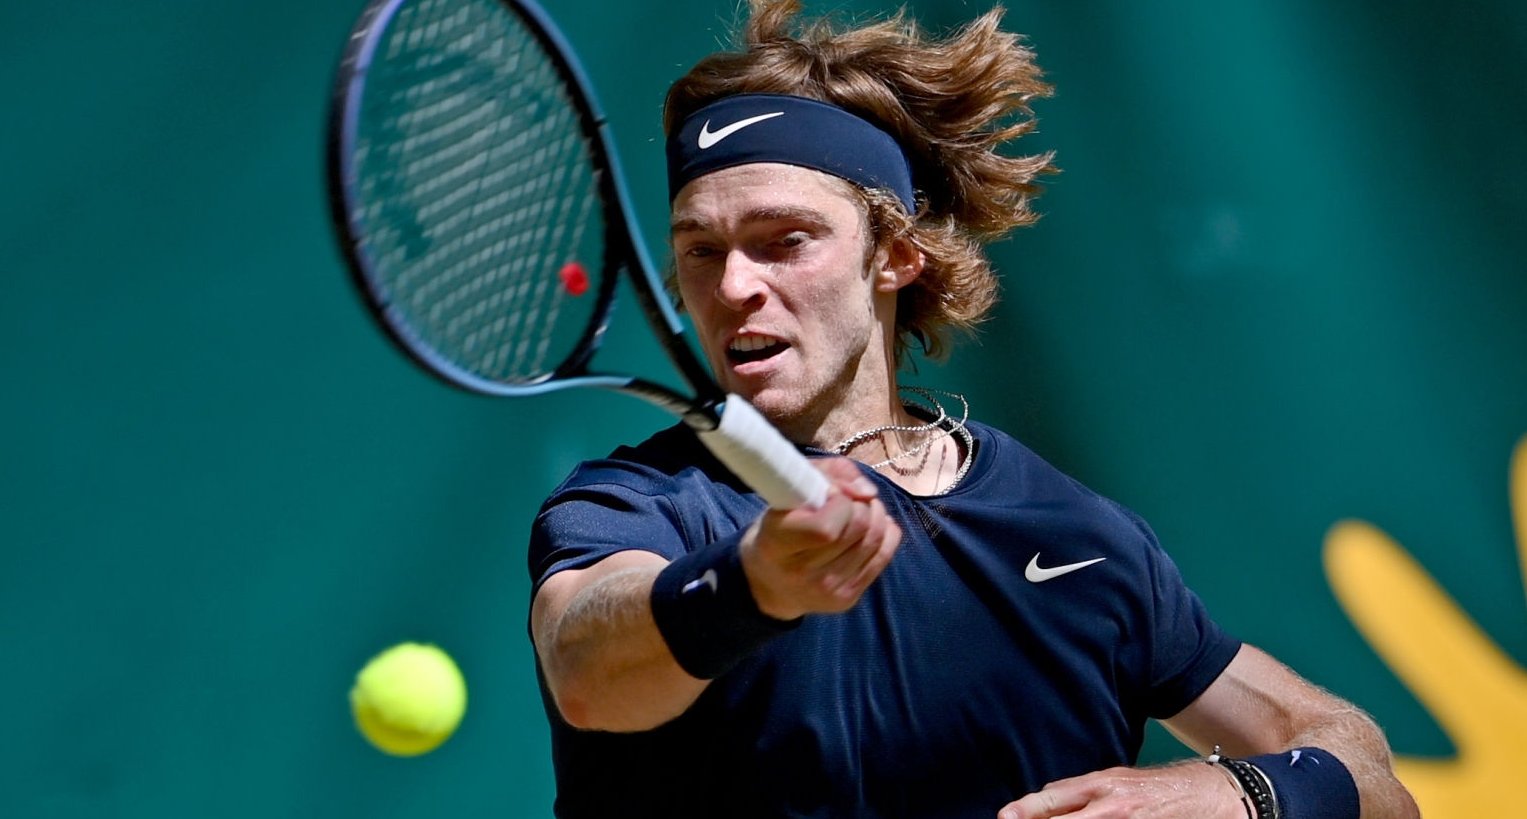 ATP Finals Live French Open finalist Tsitsipas face Rublev in round 1